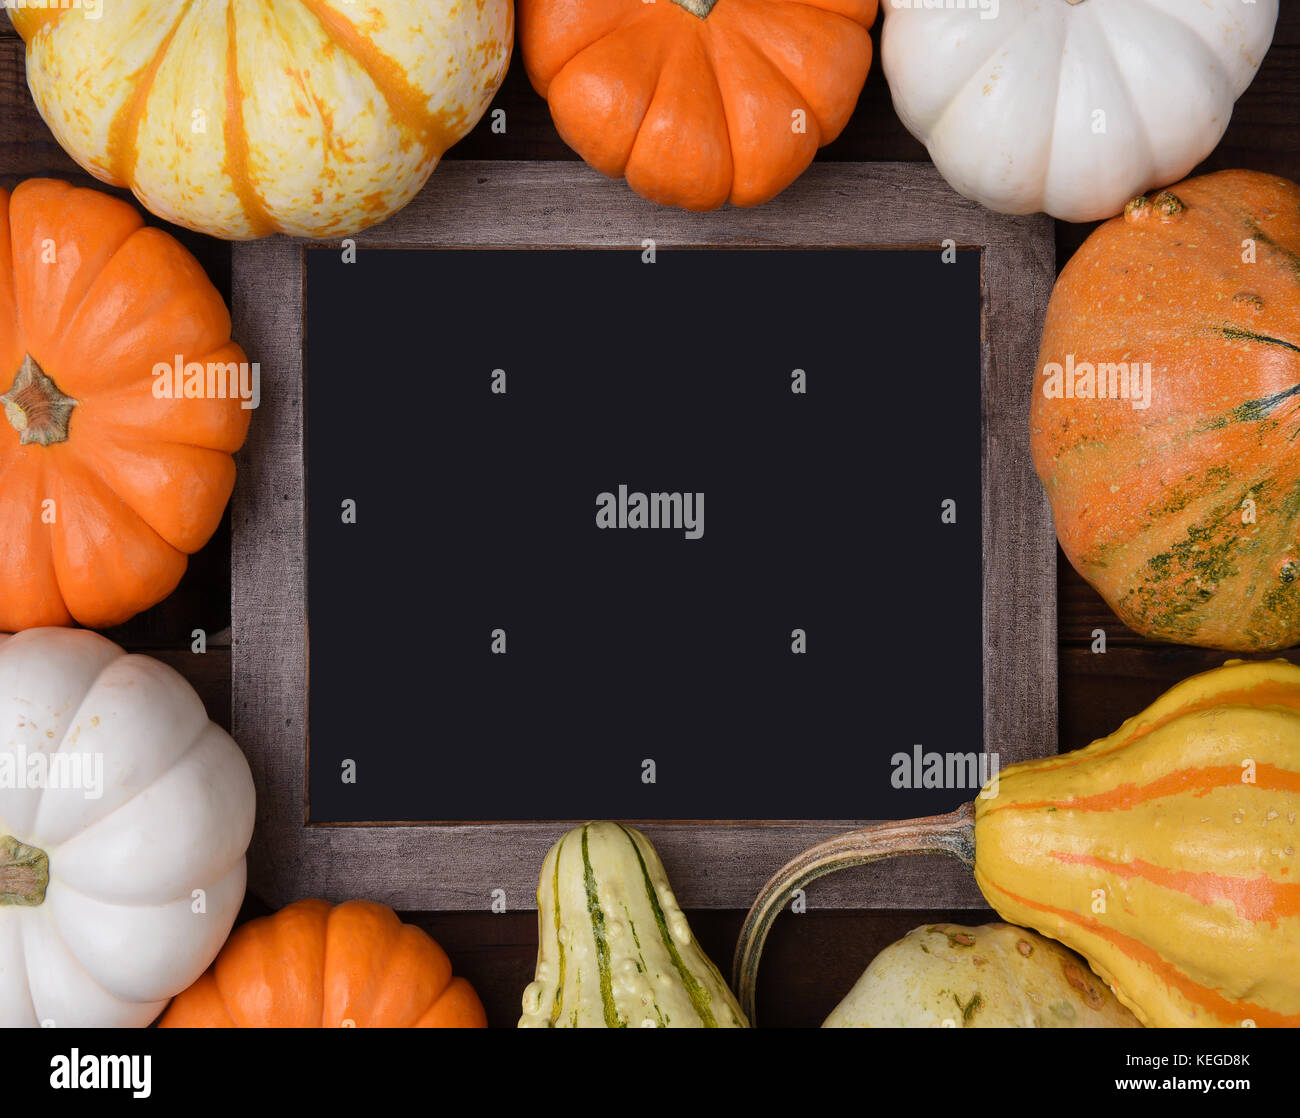 Overhead view of a group of assorted Autumn pumpkins, gourds and squash surrounding a blank chalkboard. Stock Photo